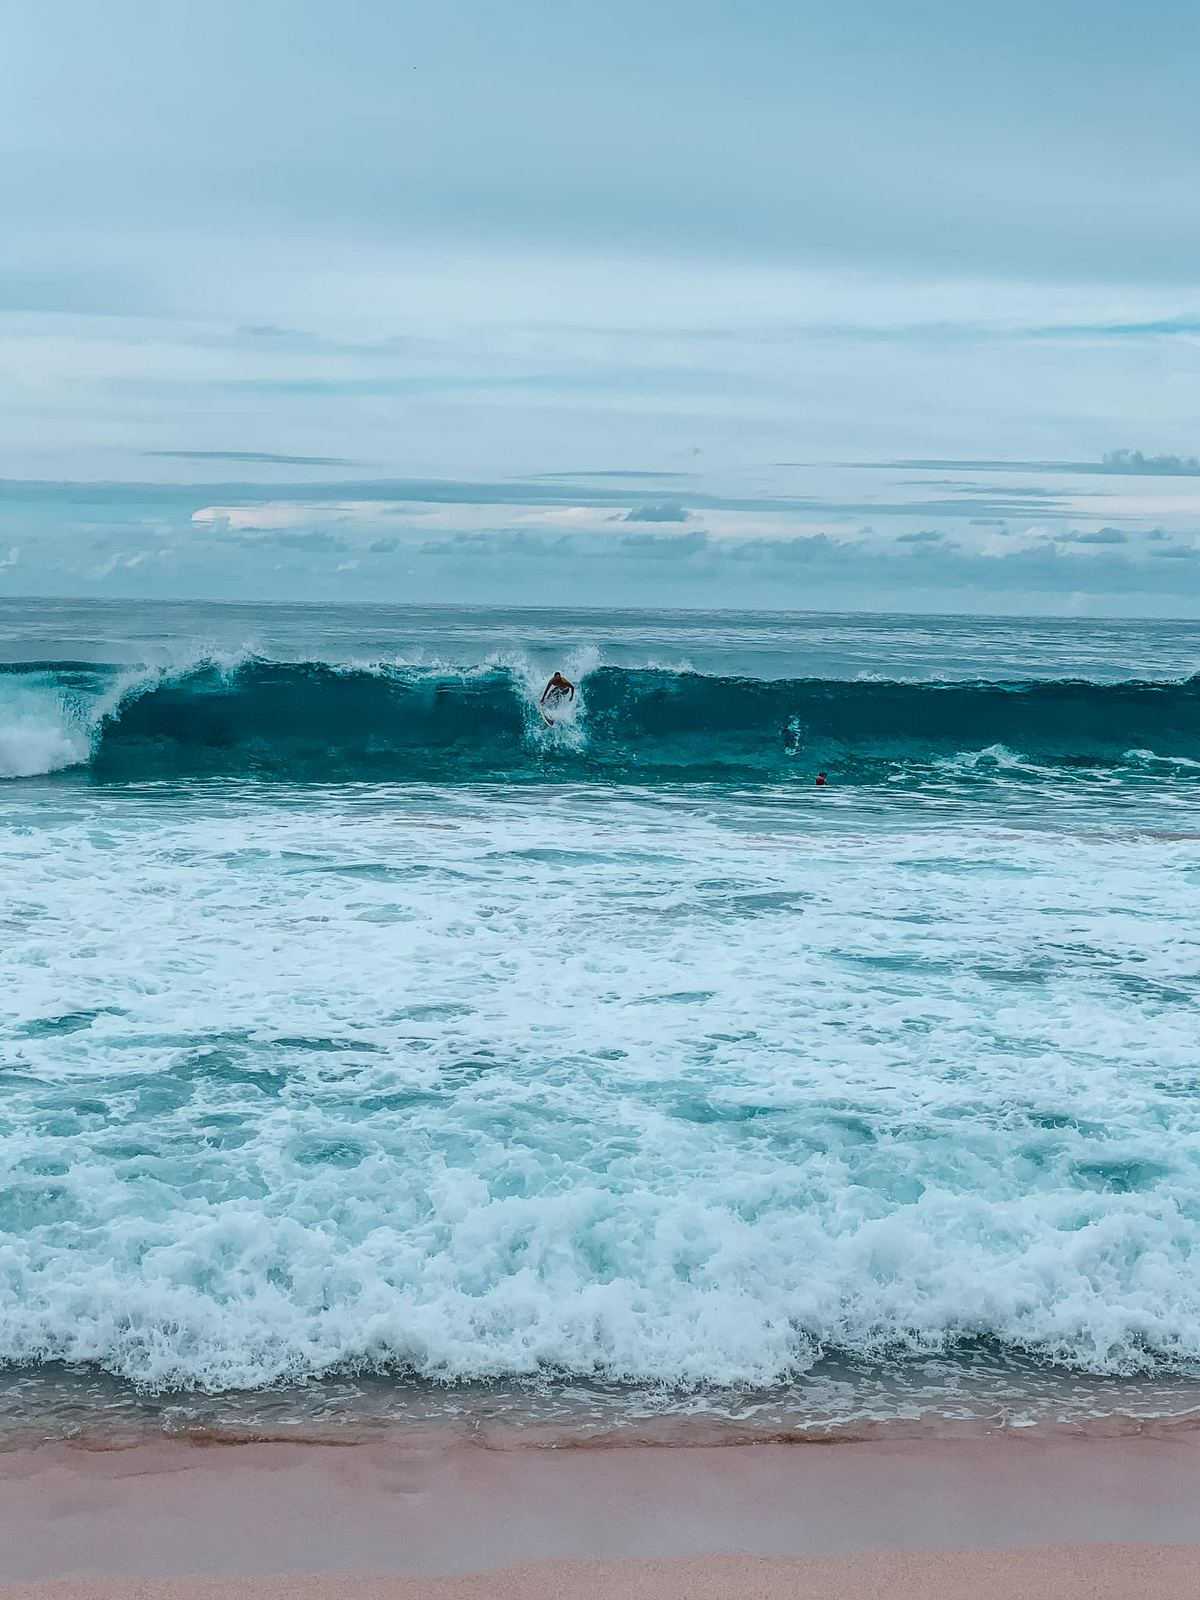 surfers surfing the Banzai Pipeline on Oahu's North Shore